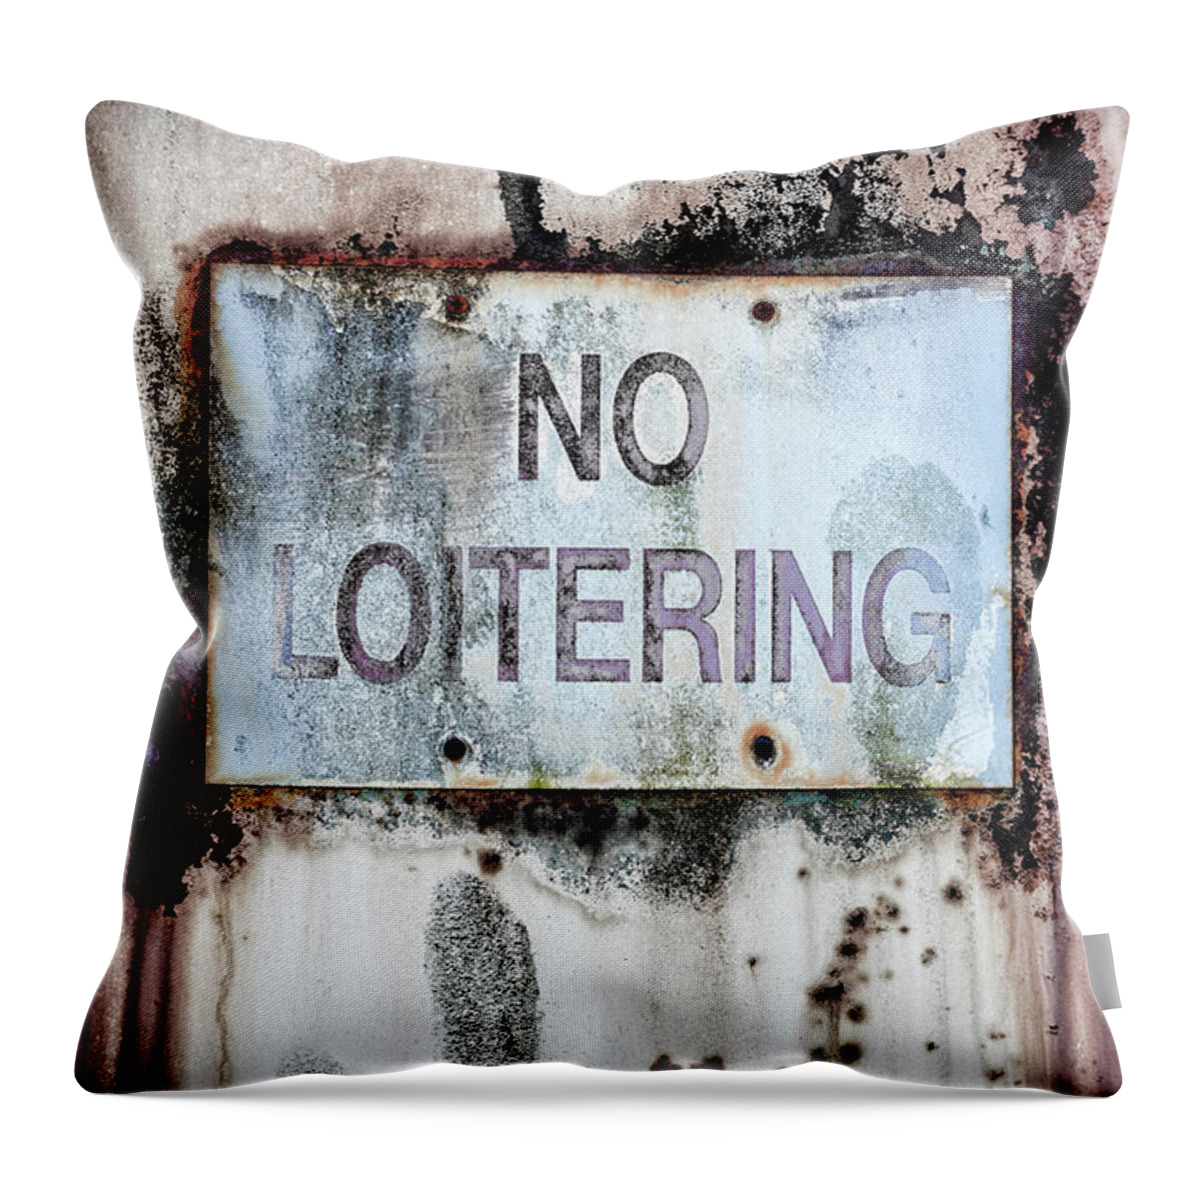 Sign Throw Pillow featuring the photograph No Loitering Sign on Trash Bin by Carol Leigh